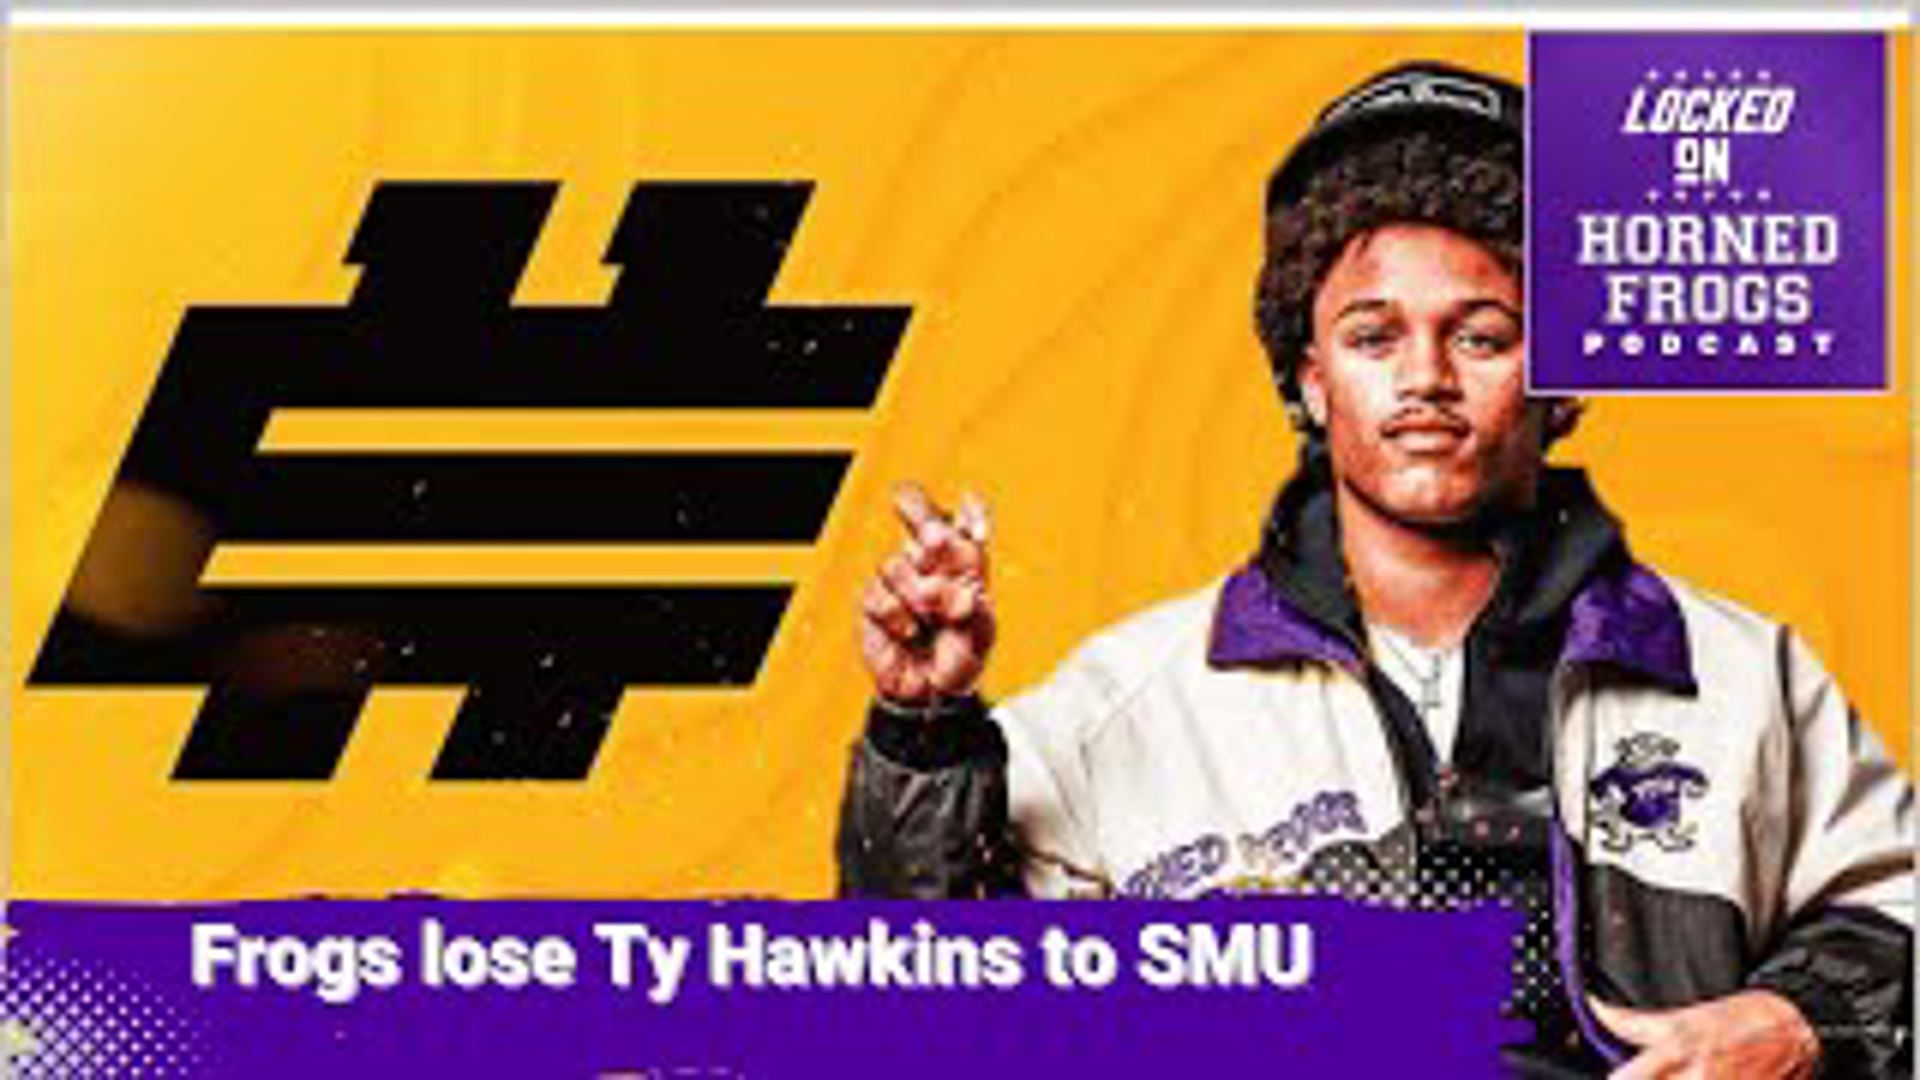 Sonny Dykes loses his 2025 QB to SMU. Where will TCU go now that Ty Hawkins has moved on?